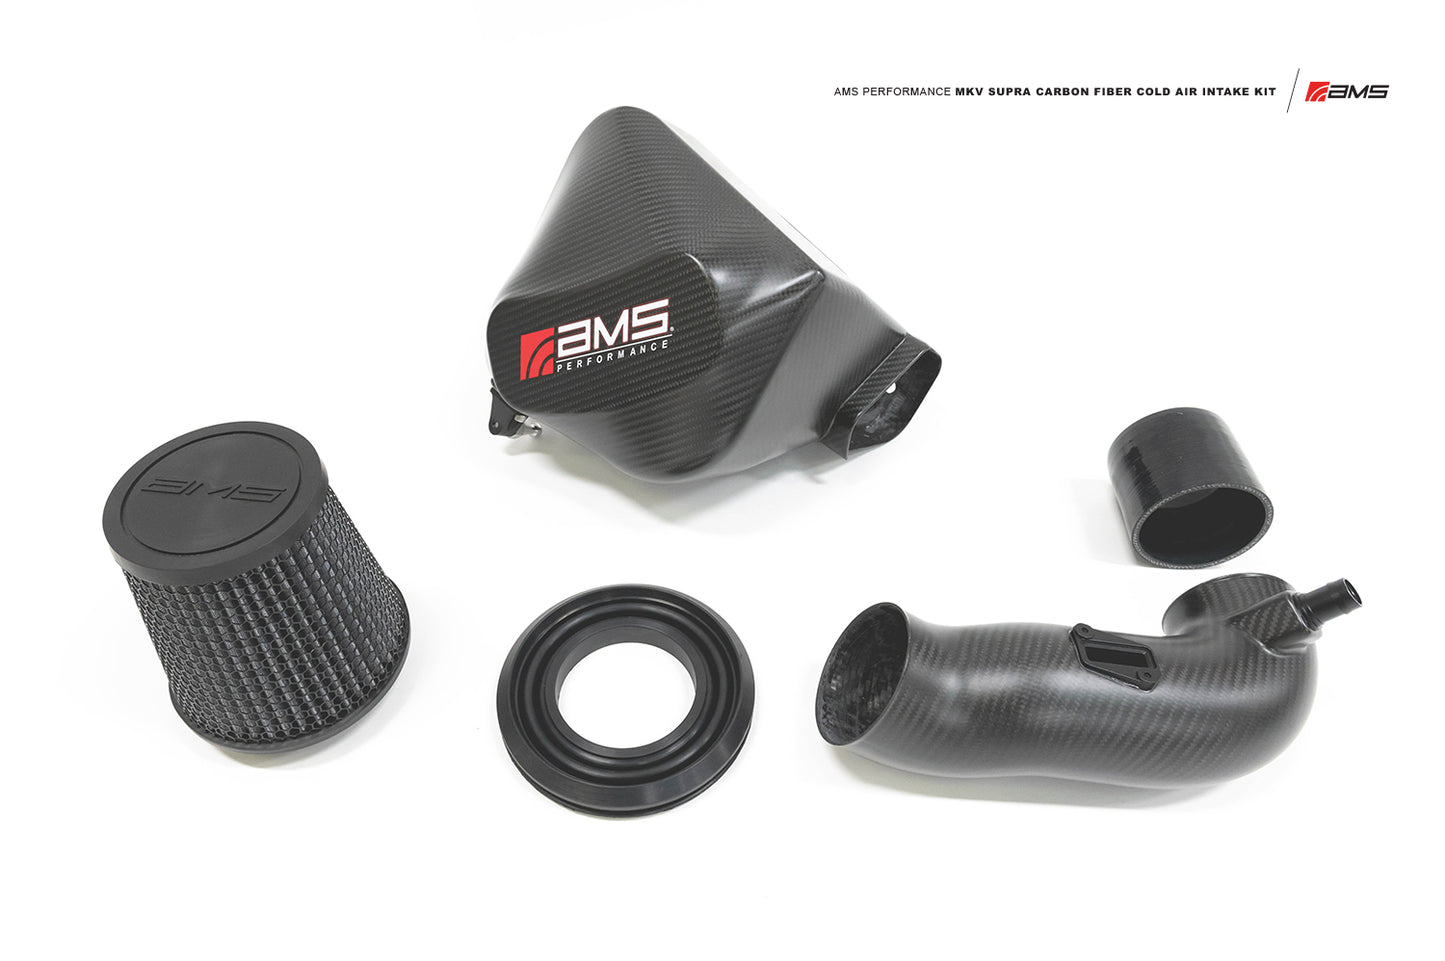 AMS Performance 2020+ Toyota Supra A90 Carbon Fiber Cold Air Intake System for the MK5 Toyota Supra GR A90 MKV - Product Overview 6